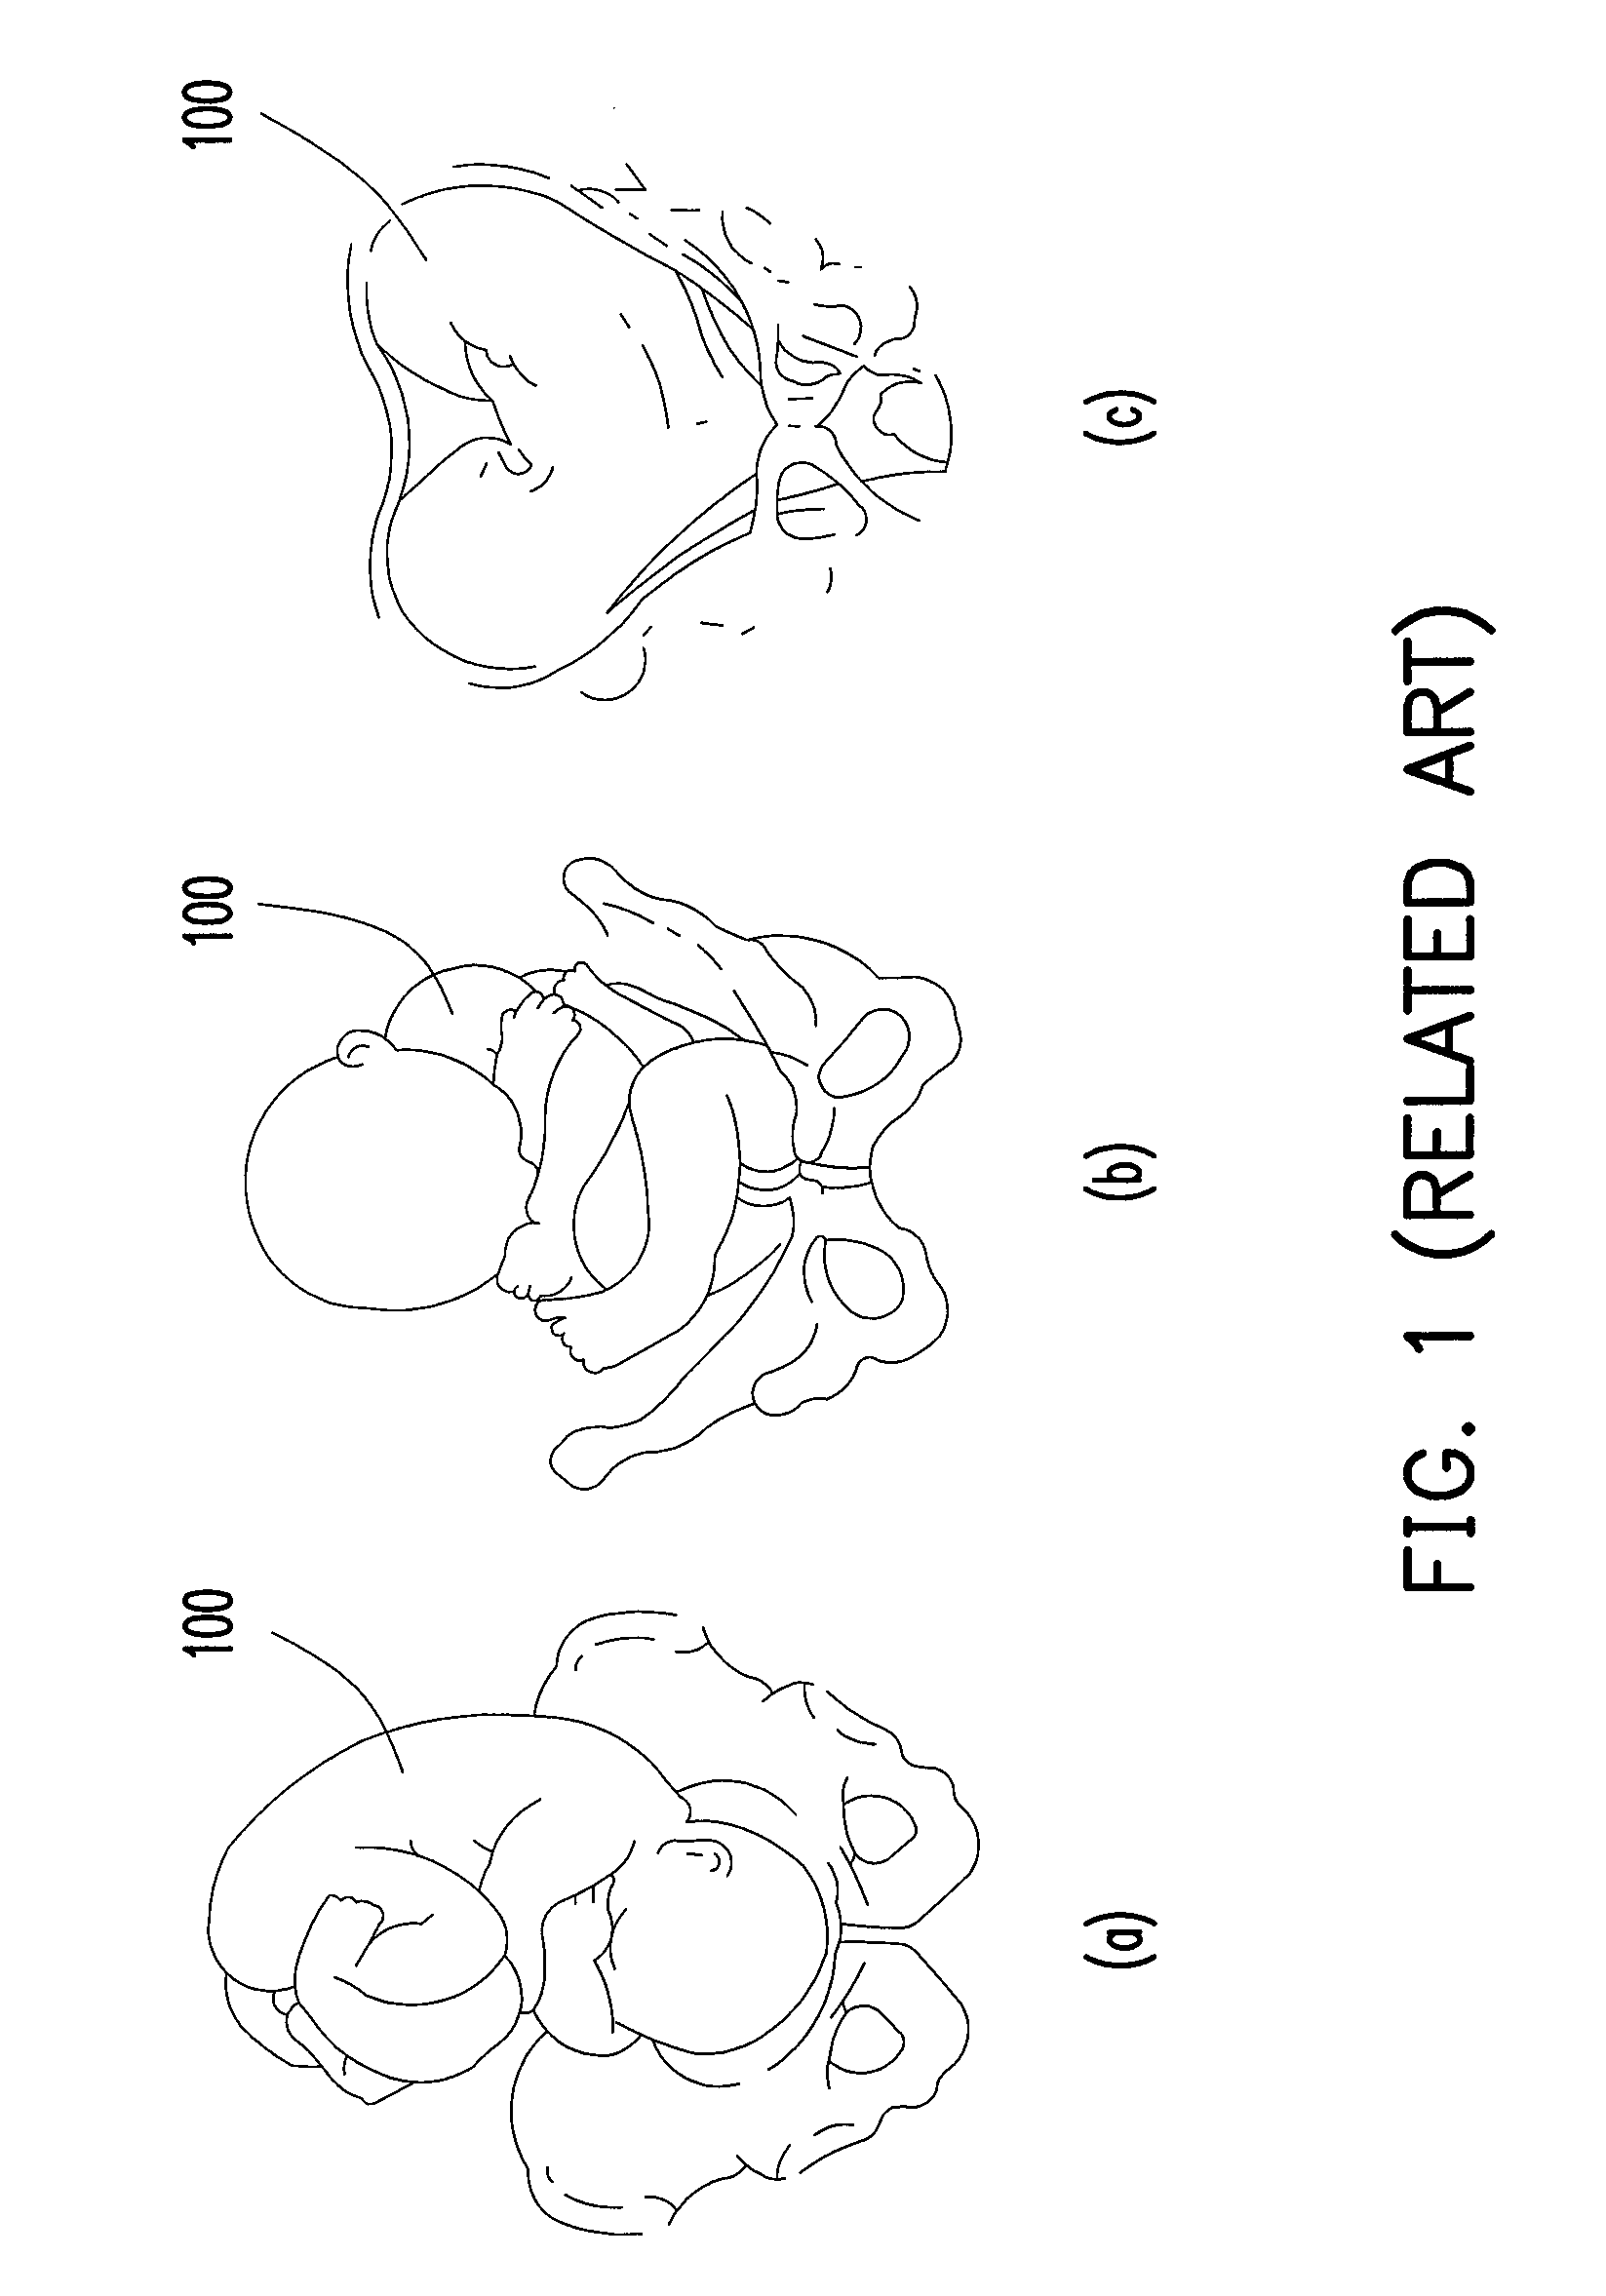 Apparatus and method for monitoring fetus in maternal body